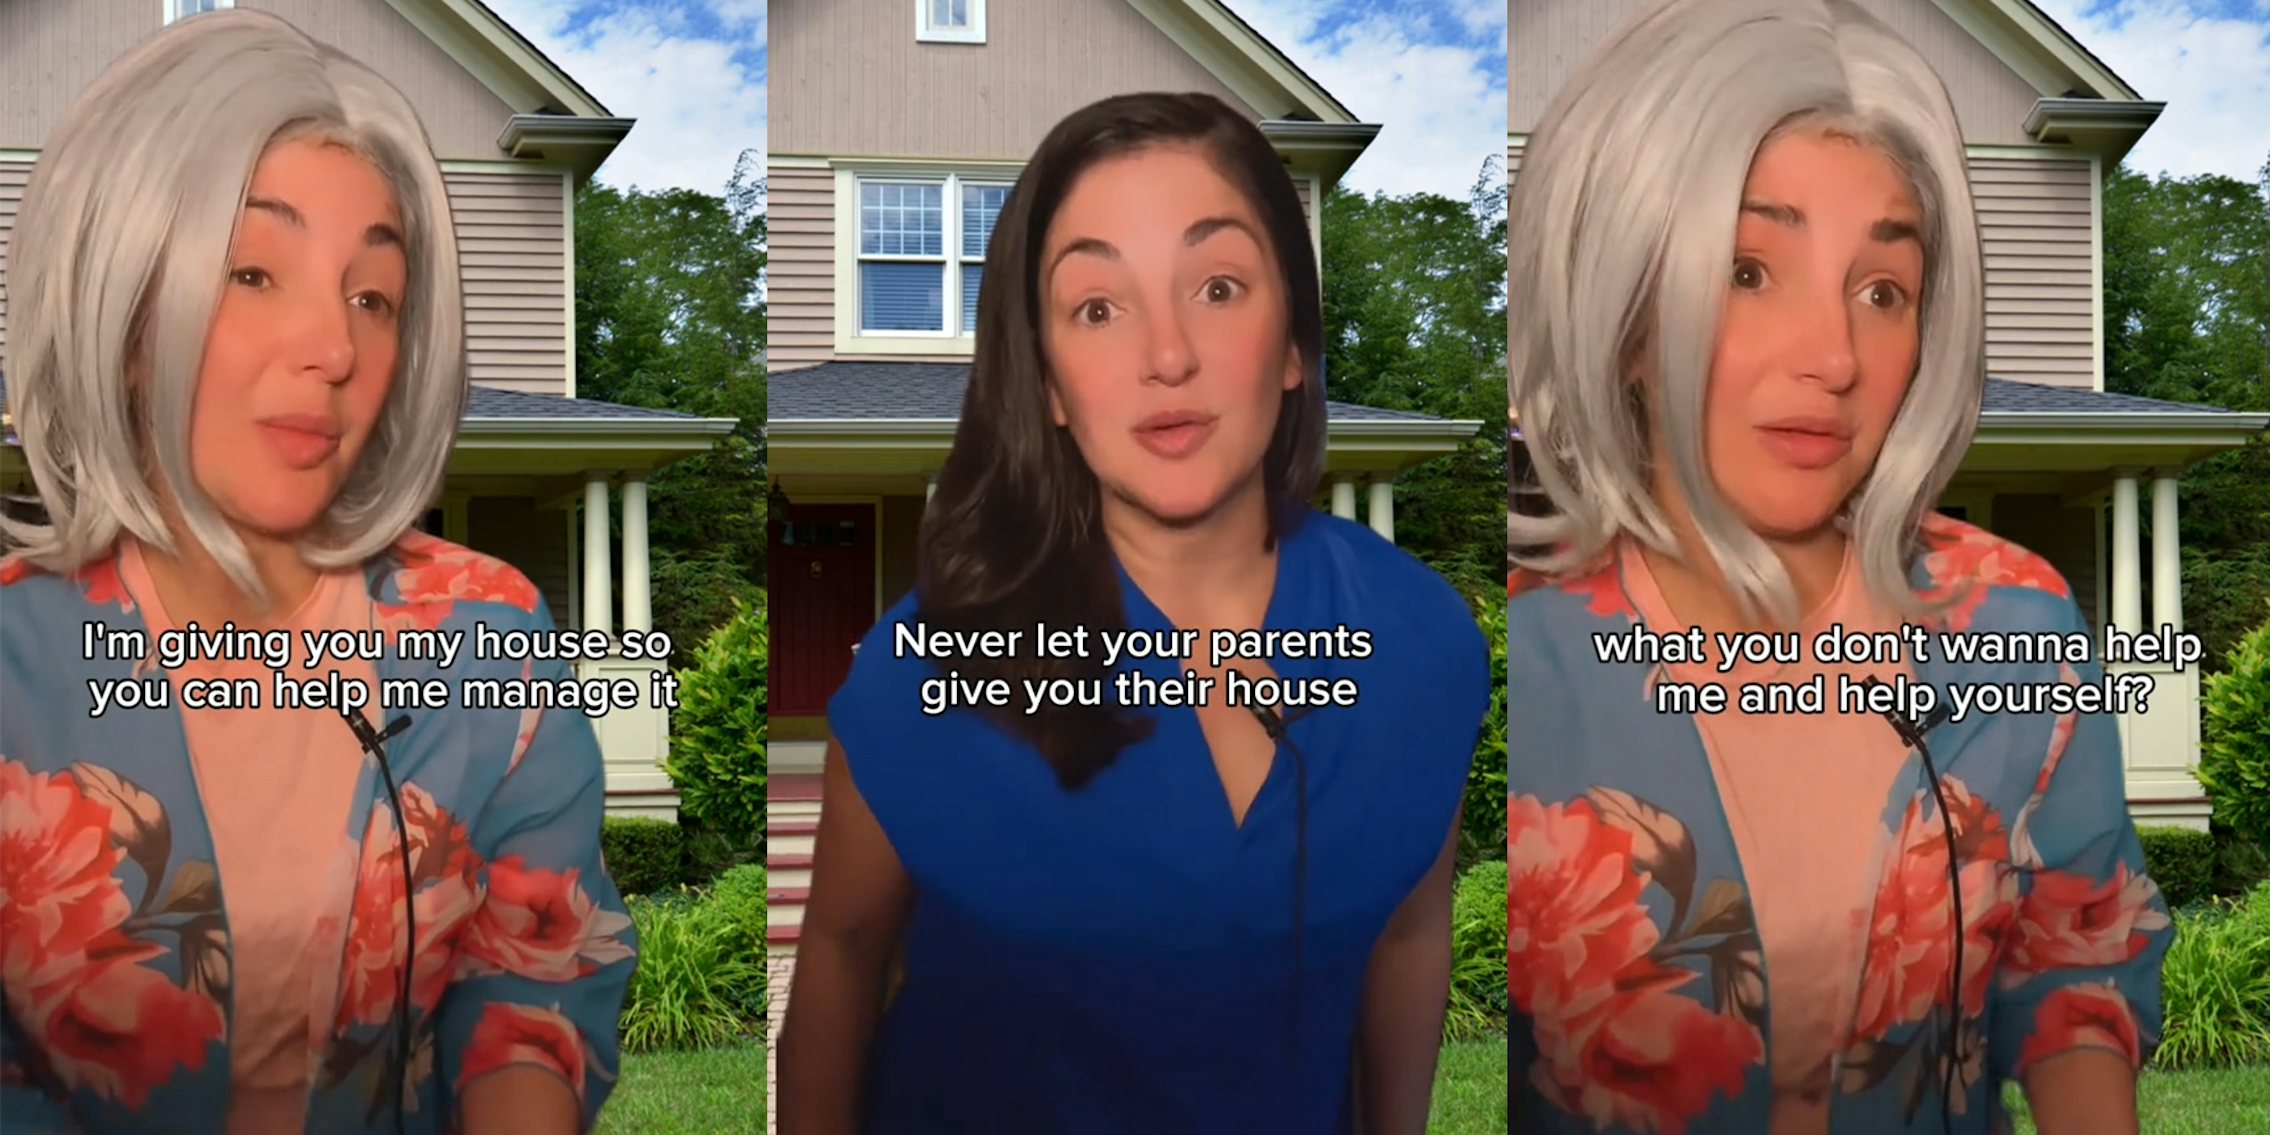 Lawyer says not to let parents gift you their house, shares what to do instead